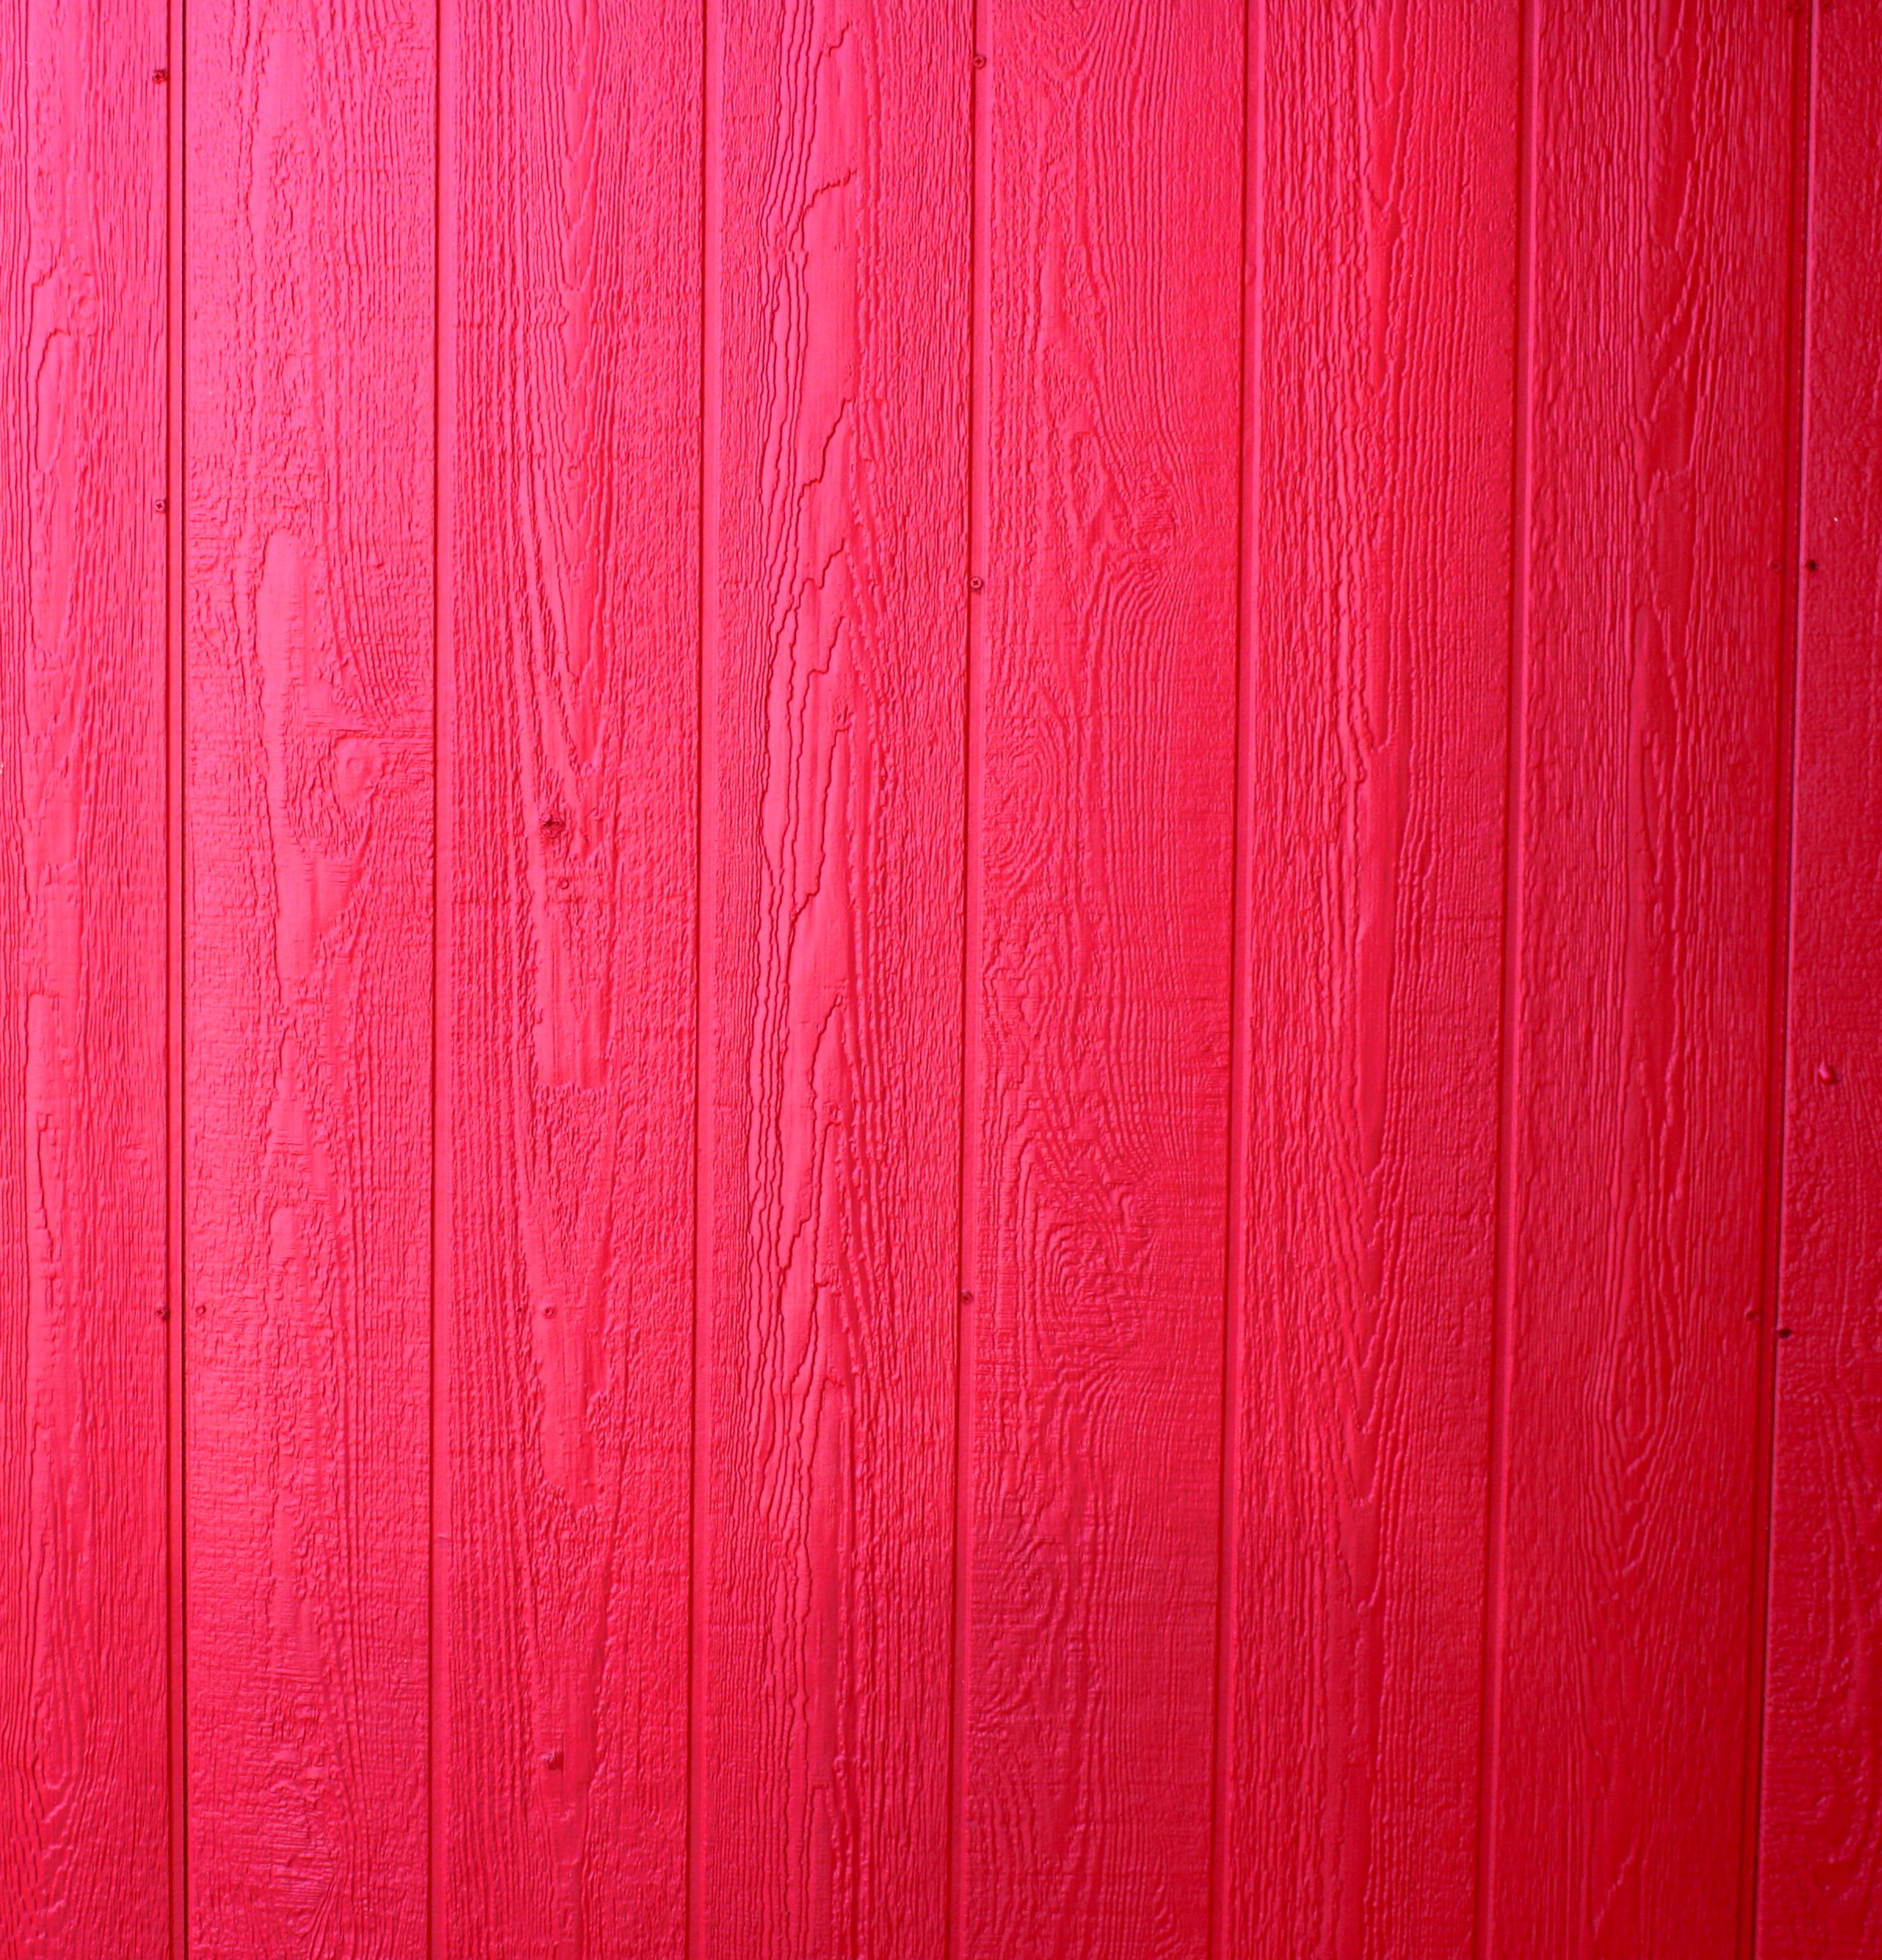 High Resolution Photograph Features A Wall Covered With Wood Paneling